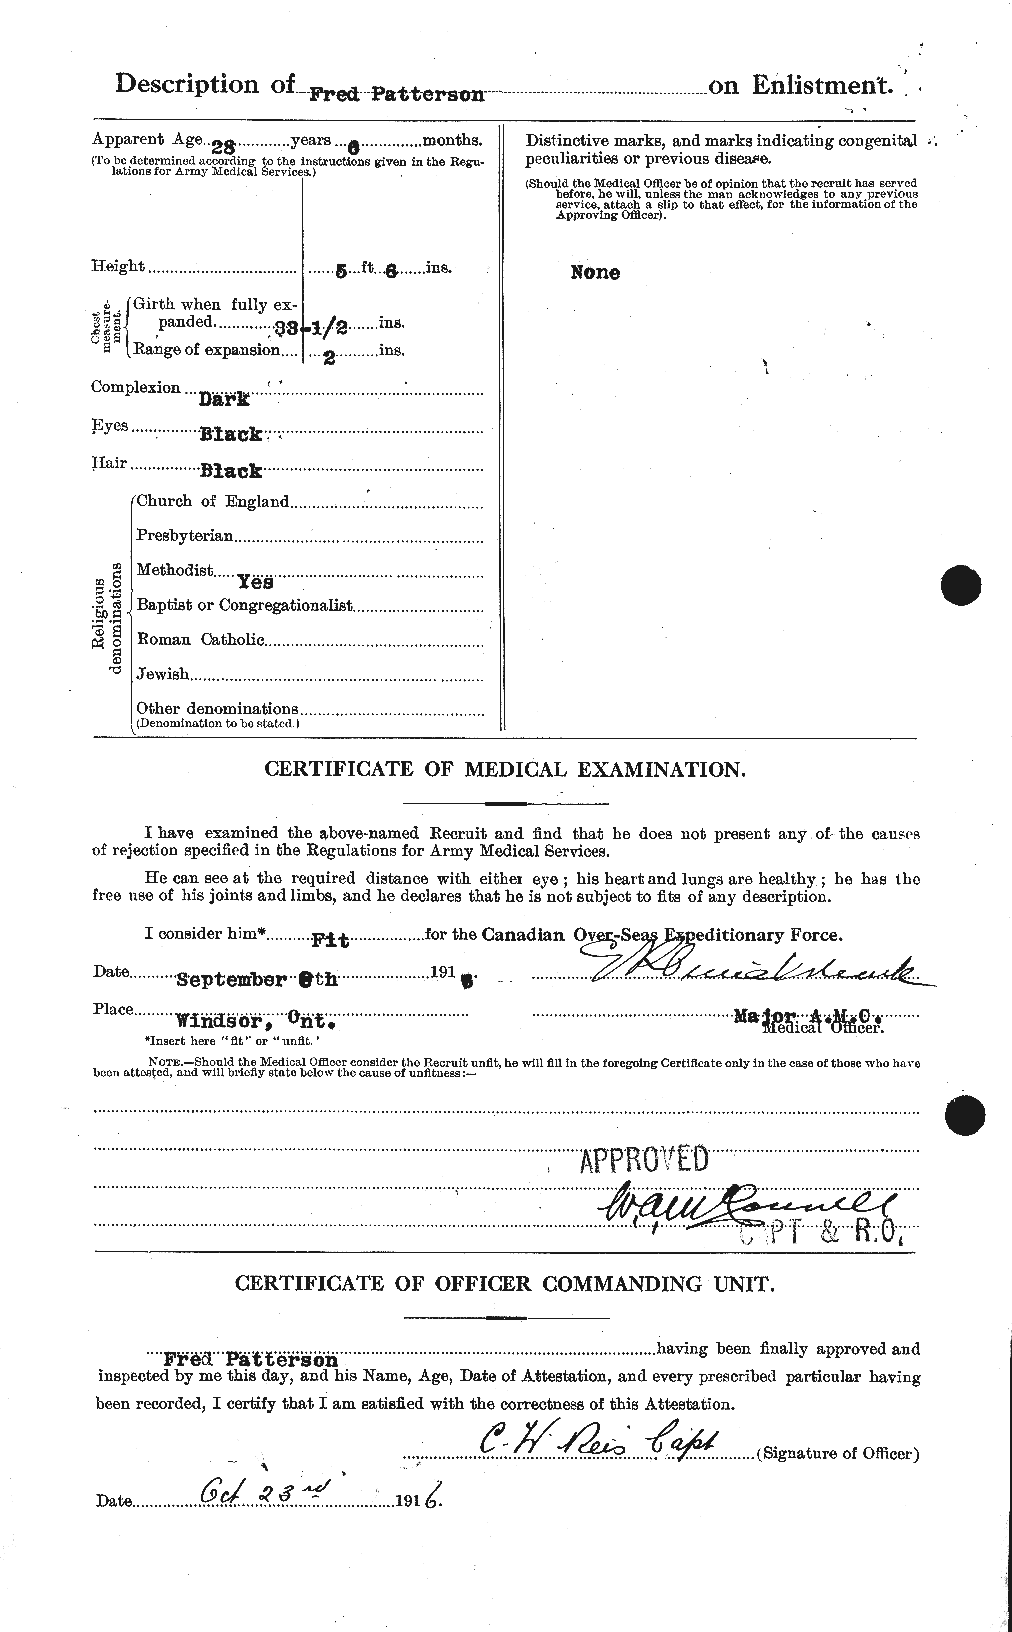 Personnel Records of the First World War - CEF 568385b